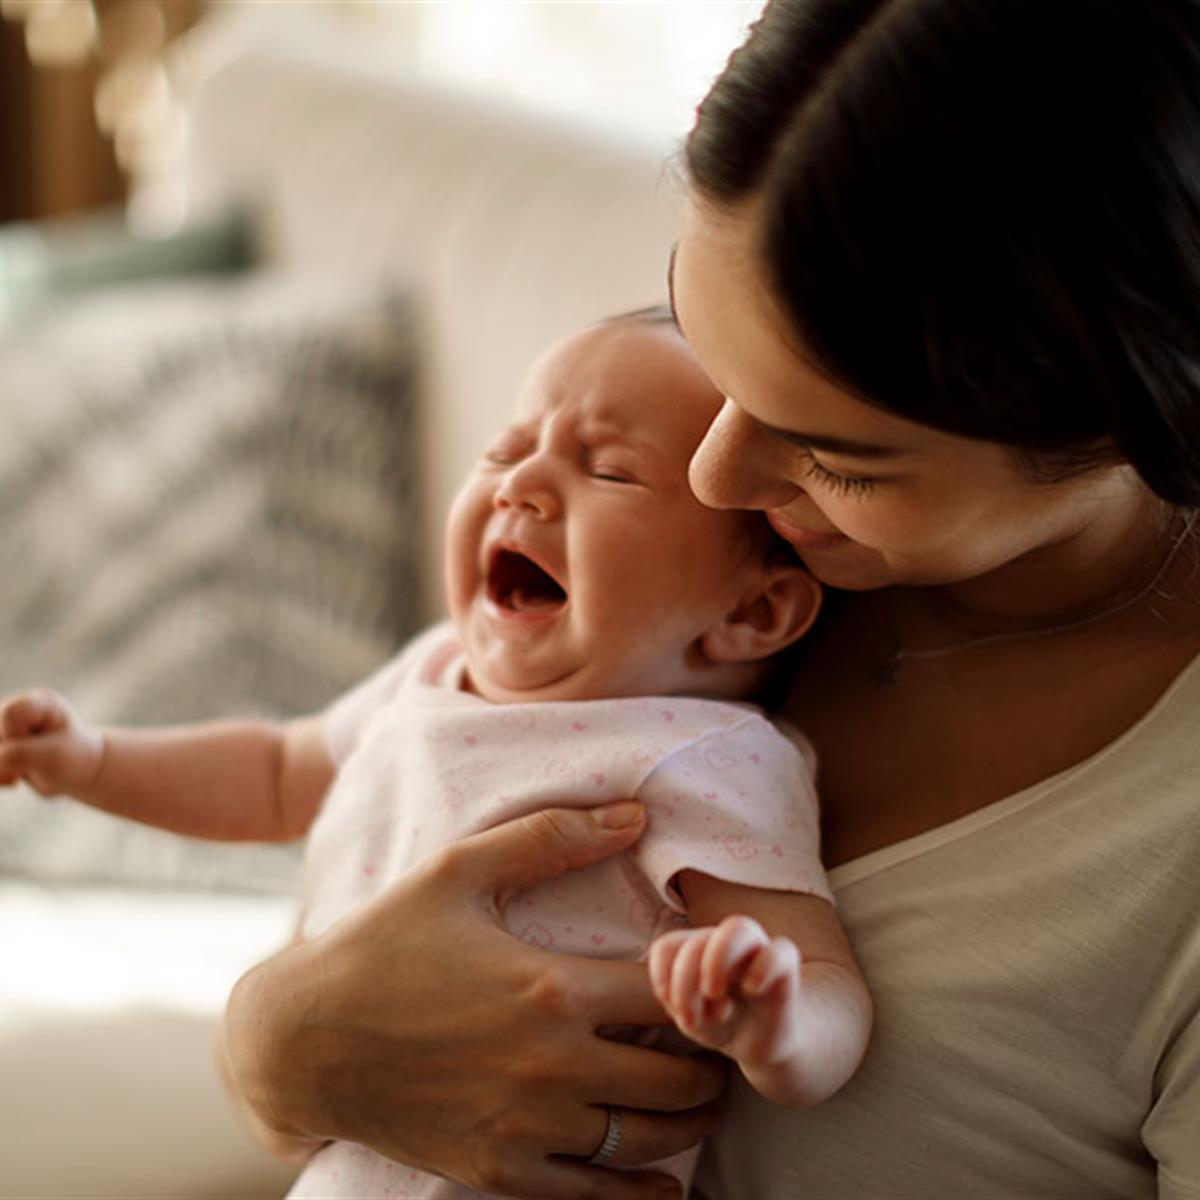 Is Your Baby Full? How Can You Tell? Find Out Here